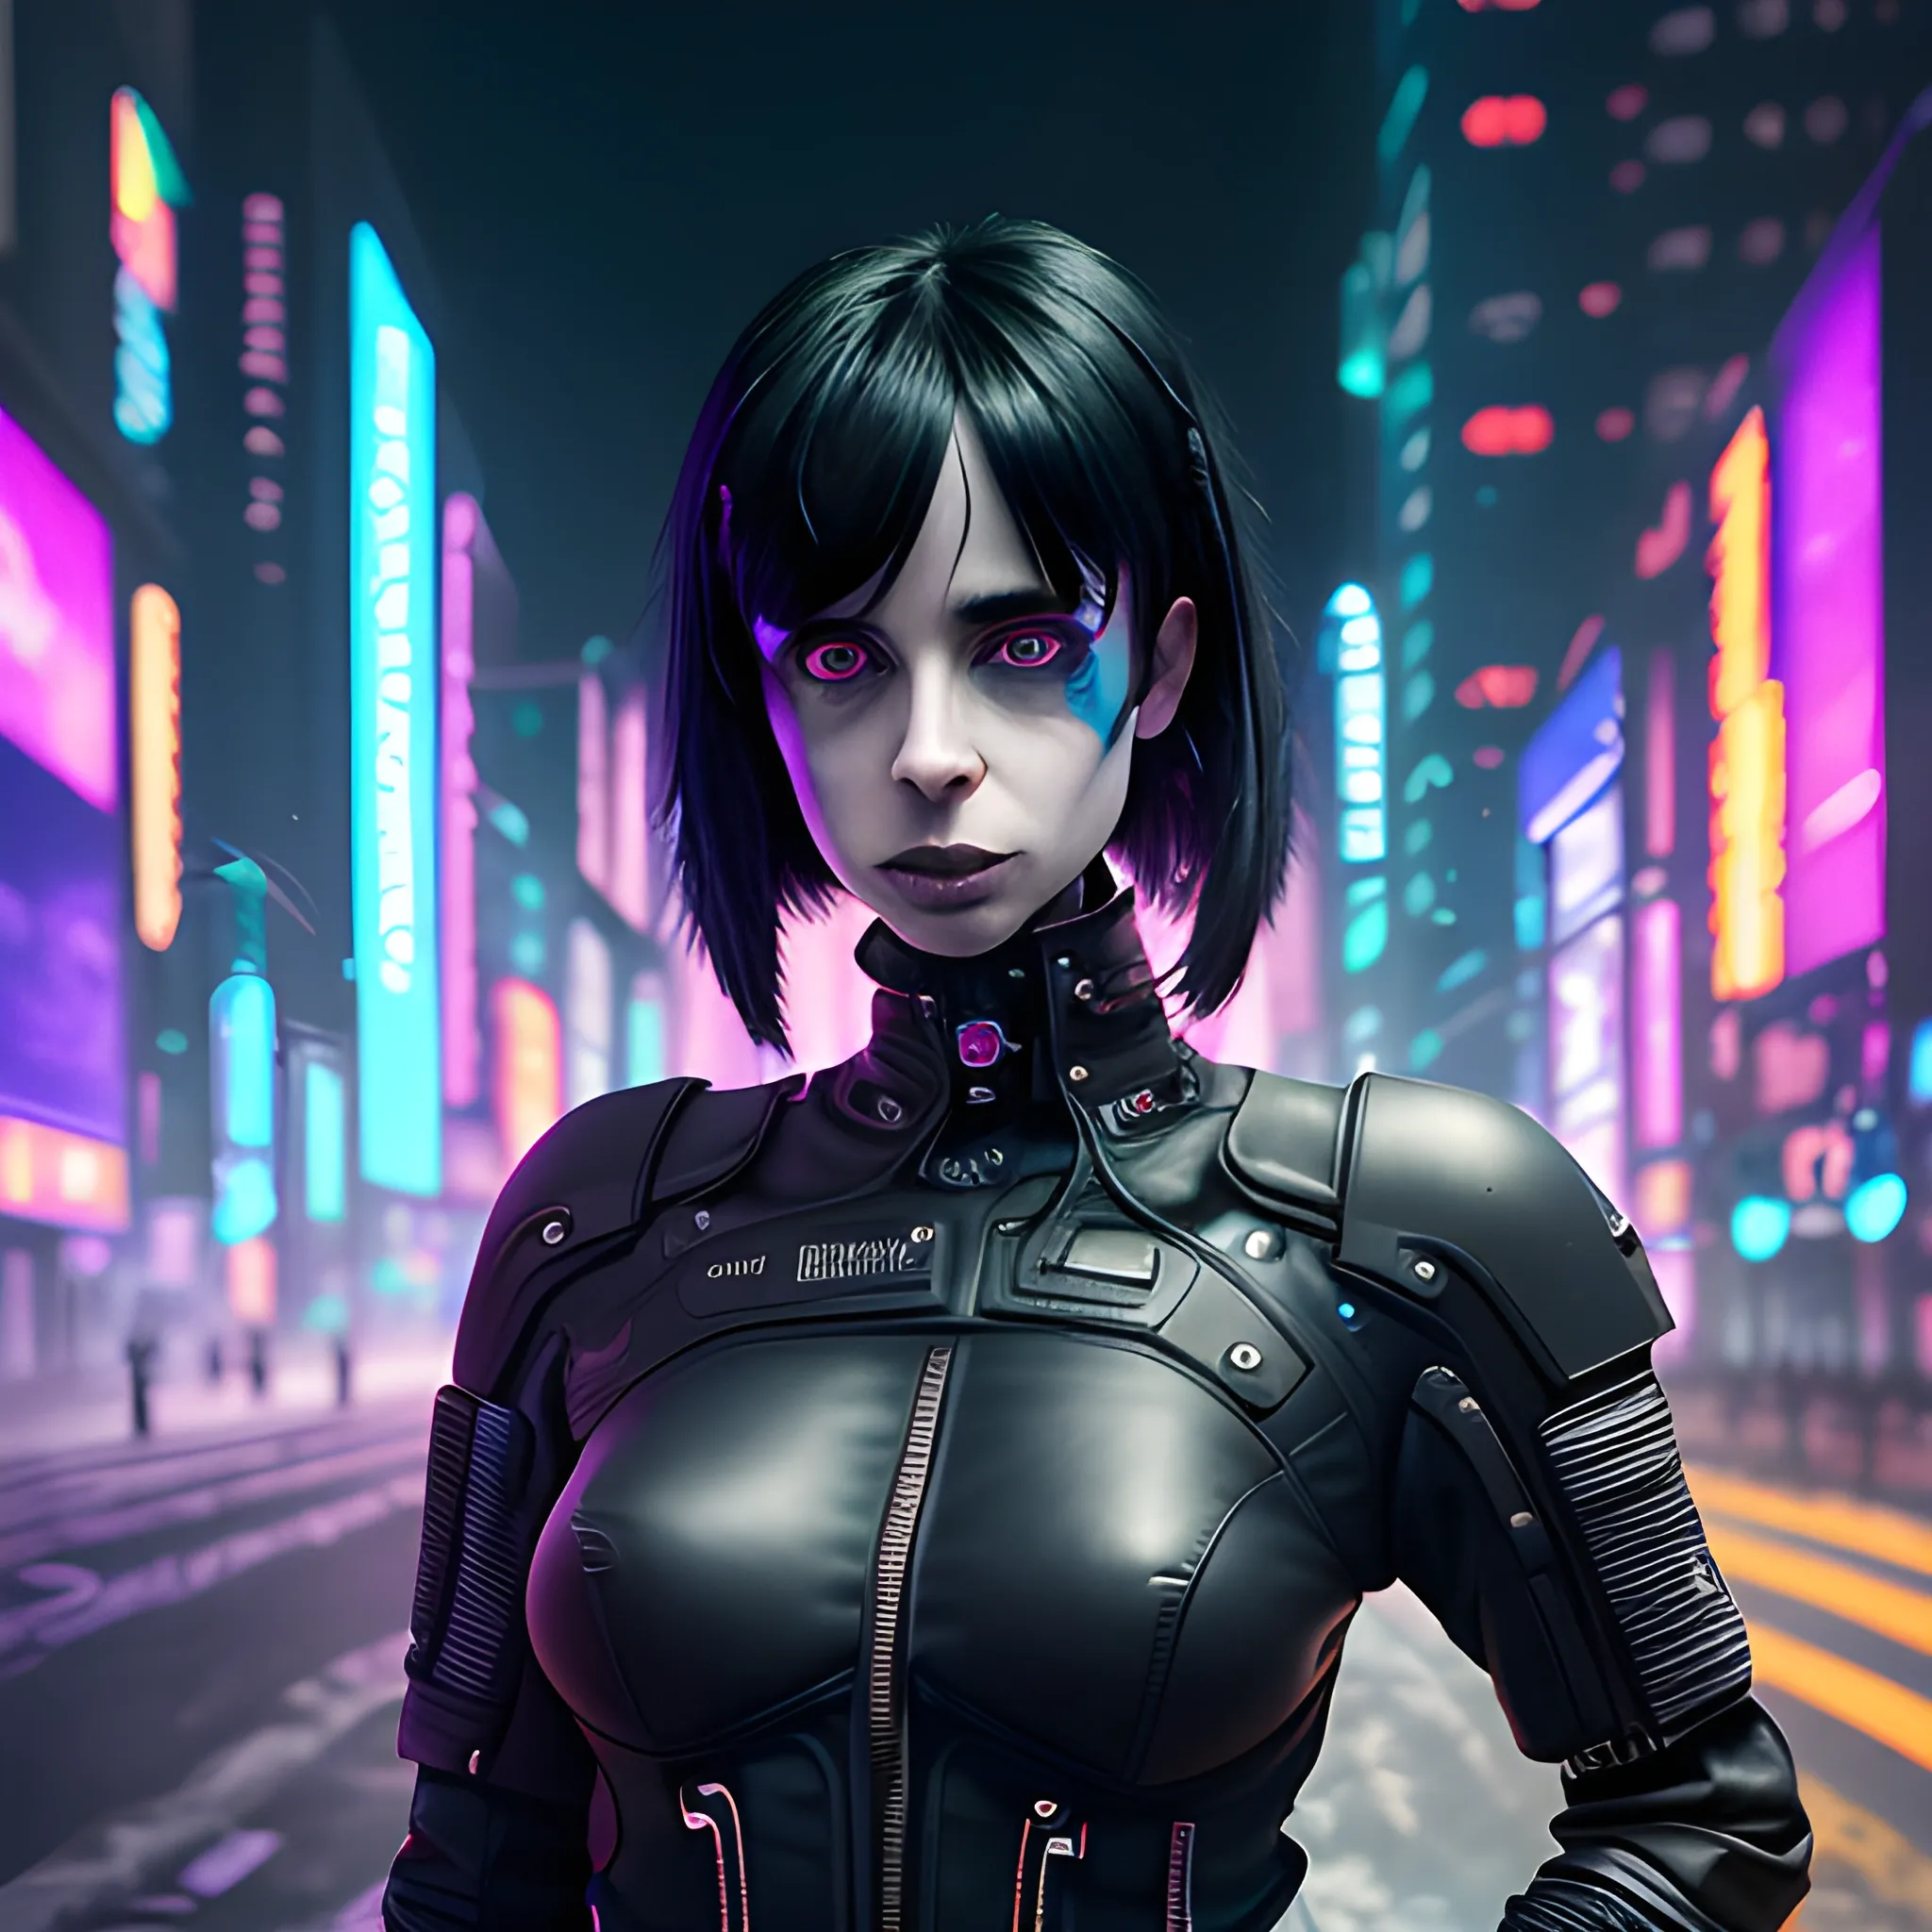 Female, Cyberpunk Night City, black hole, singularity, apocalypse, nihilism, Cthuru, grand worldview, strong visual impact, Krysten Ritter goth black bangs dark makeup, the picture should have the feeling of immersion, -- ar 9, KS, Cai Guo-Qiang, soft lights, Depth of field (DOF), Full Length Shot (FLS)